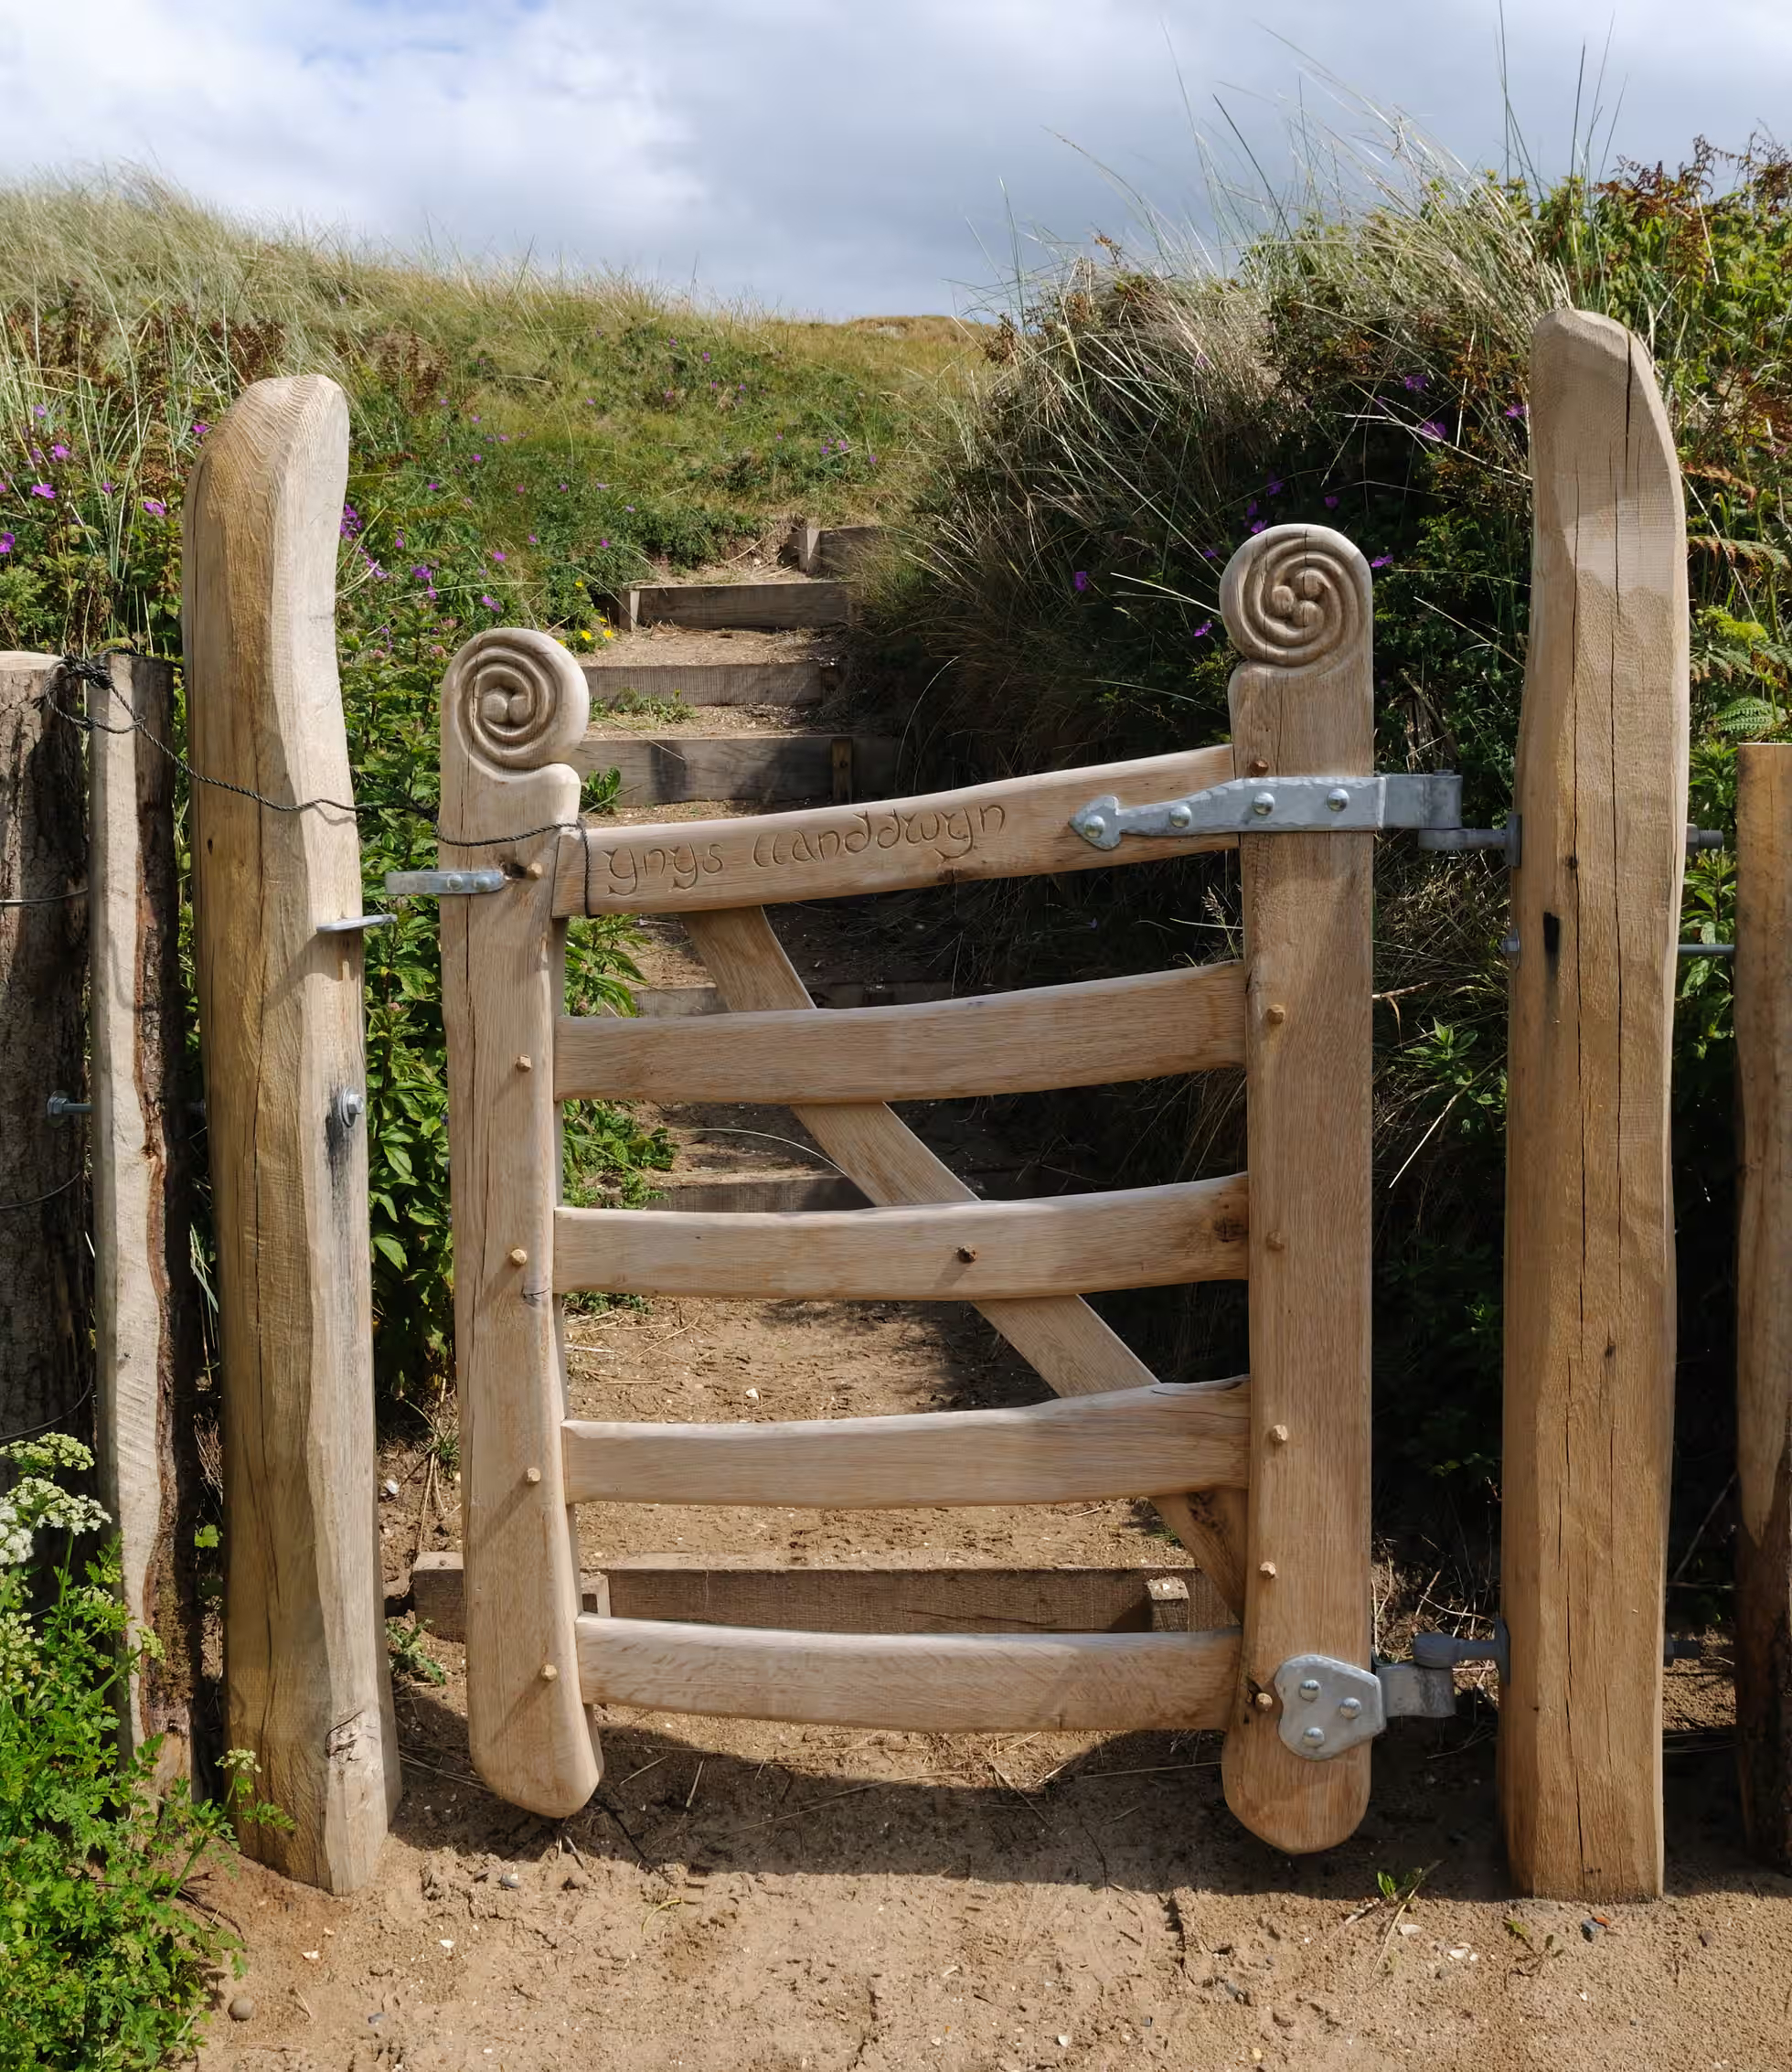 Another of the gatemaker’s creations nearby on the island. Photograph: Joan Gravell/Alamy